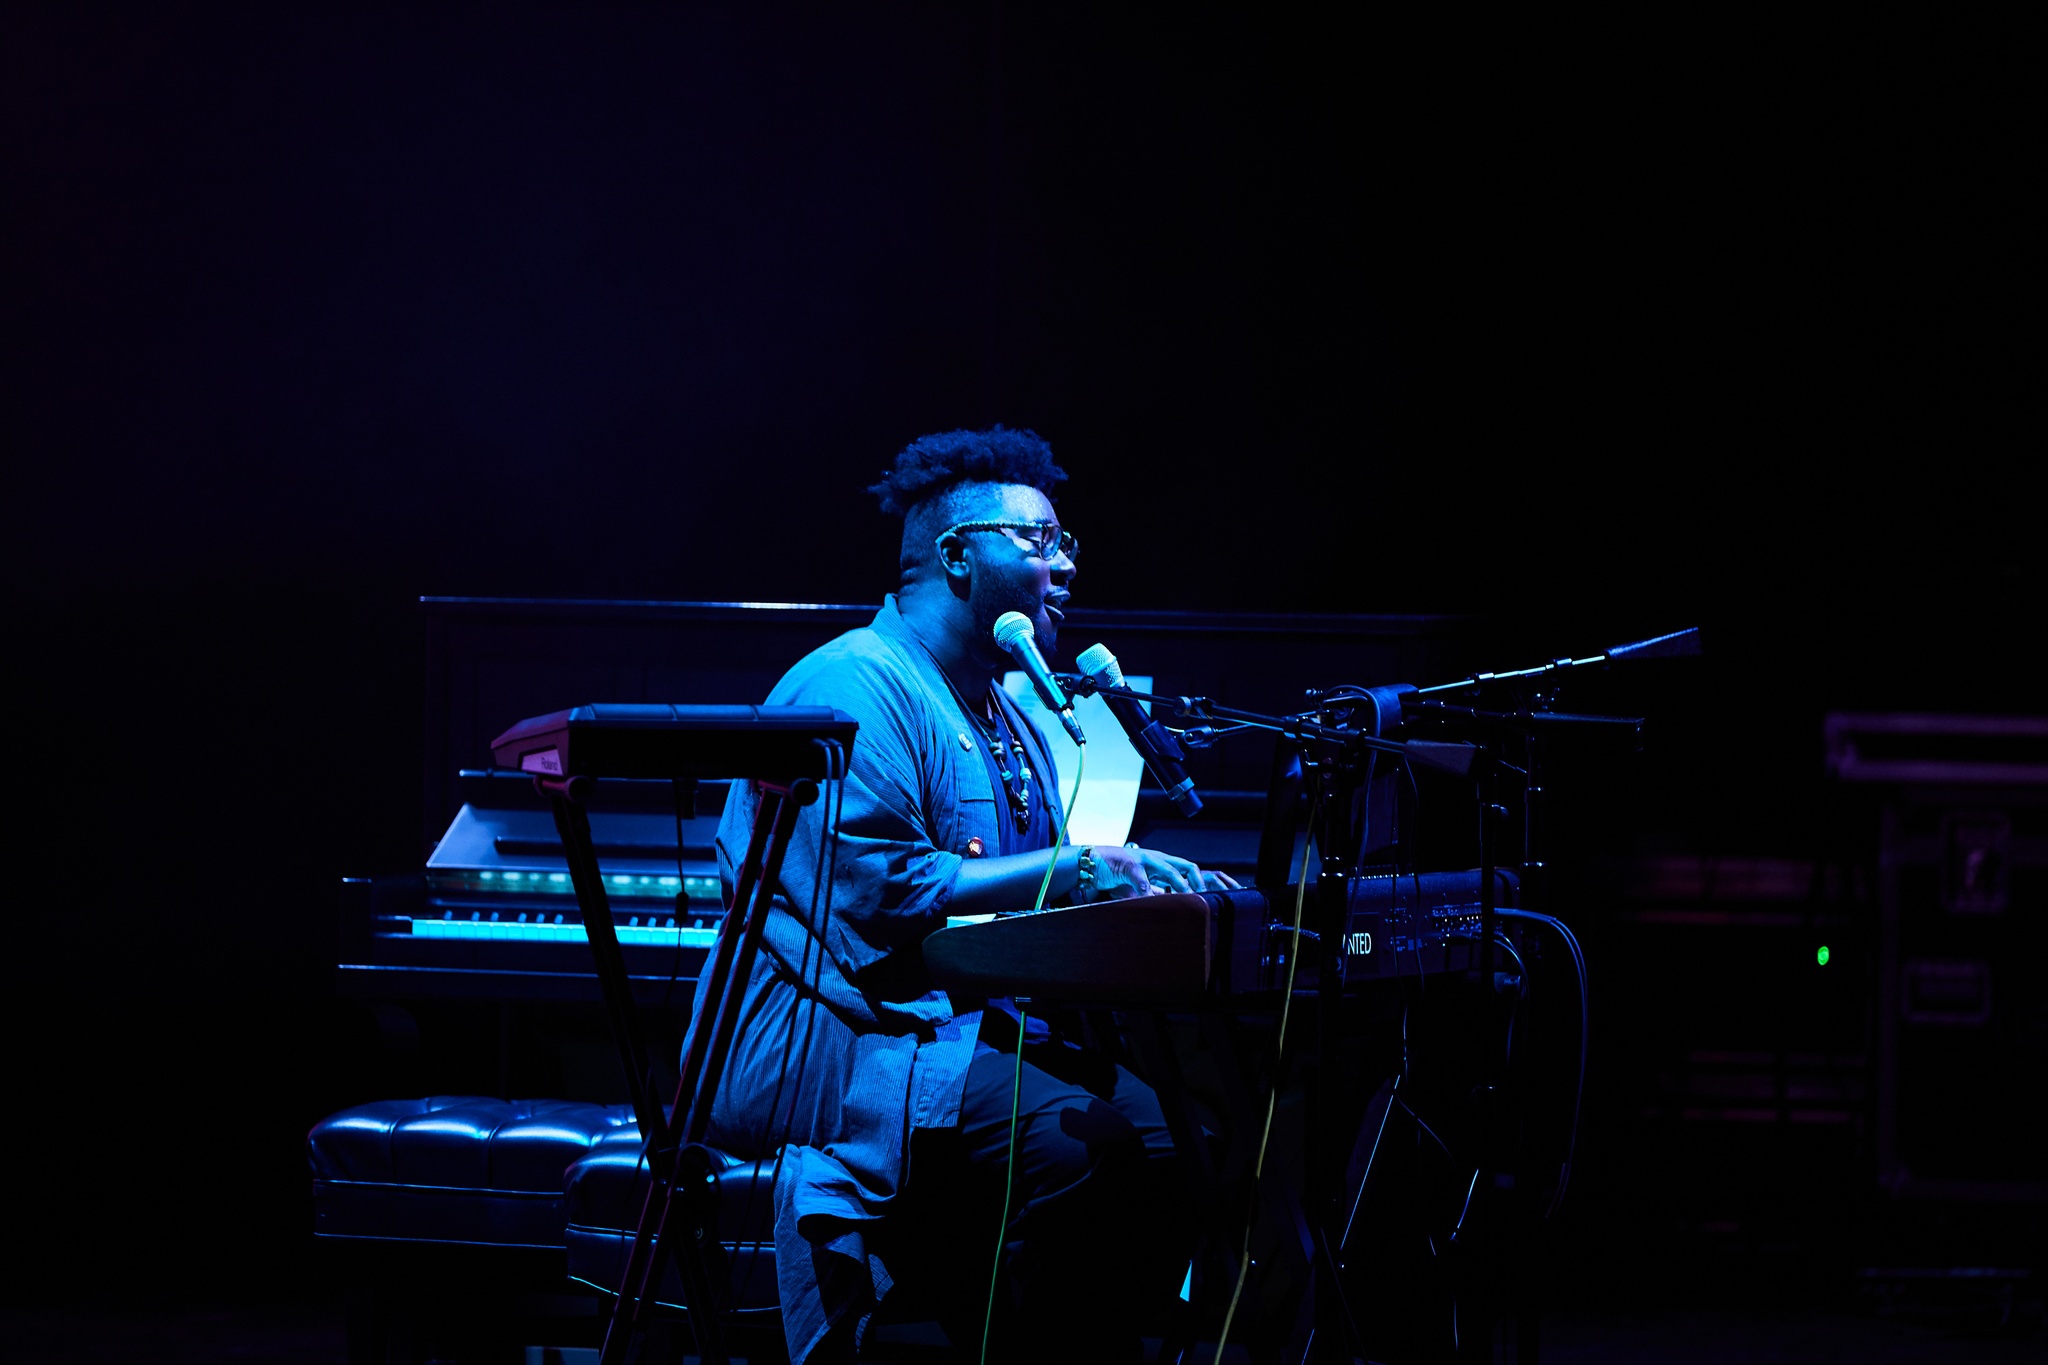 Tariq playing piano while singing on blue-lit stage.